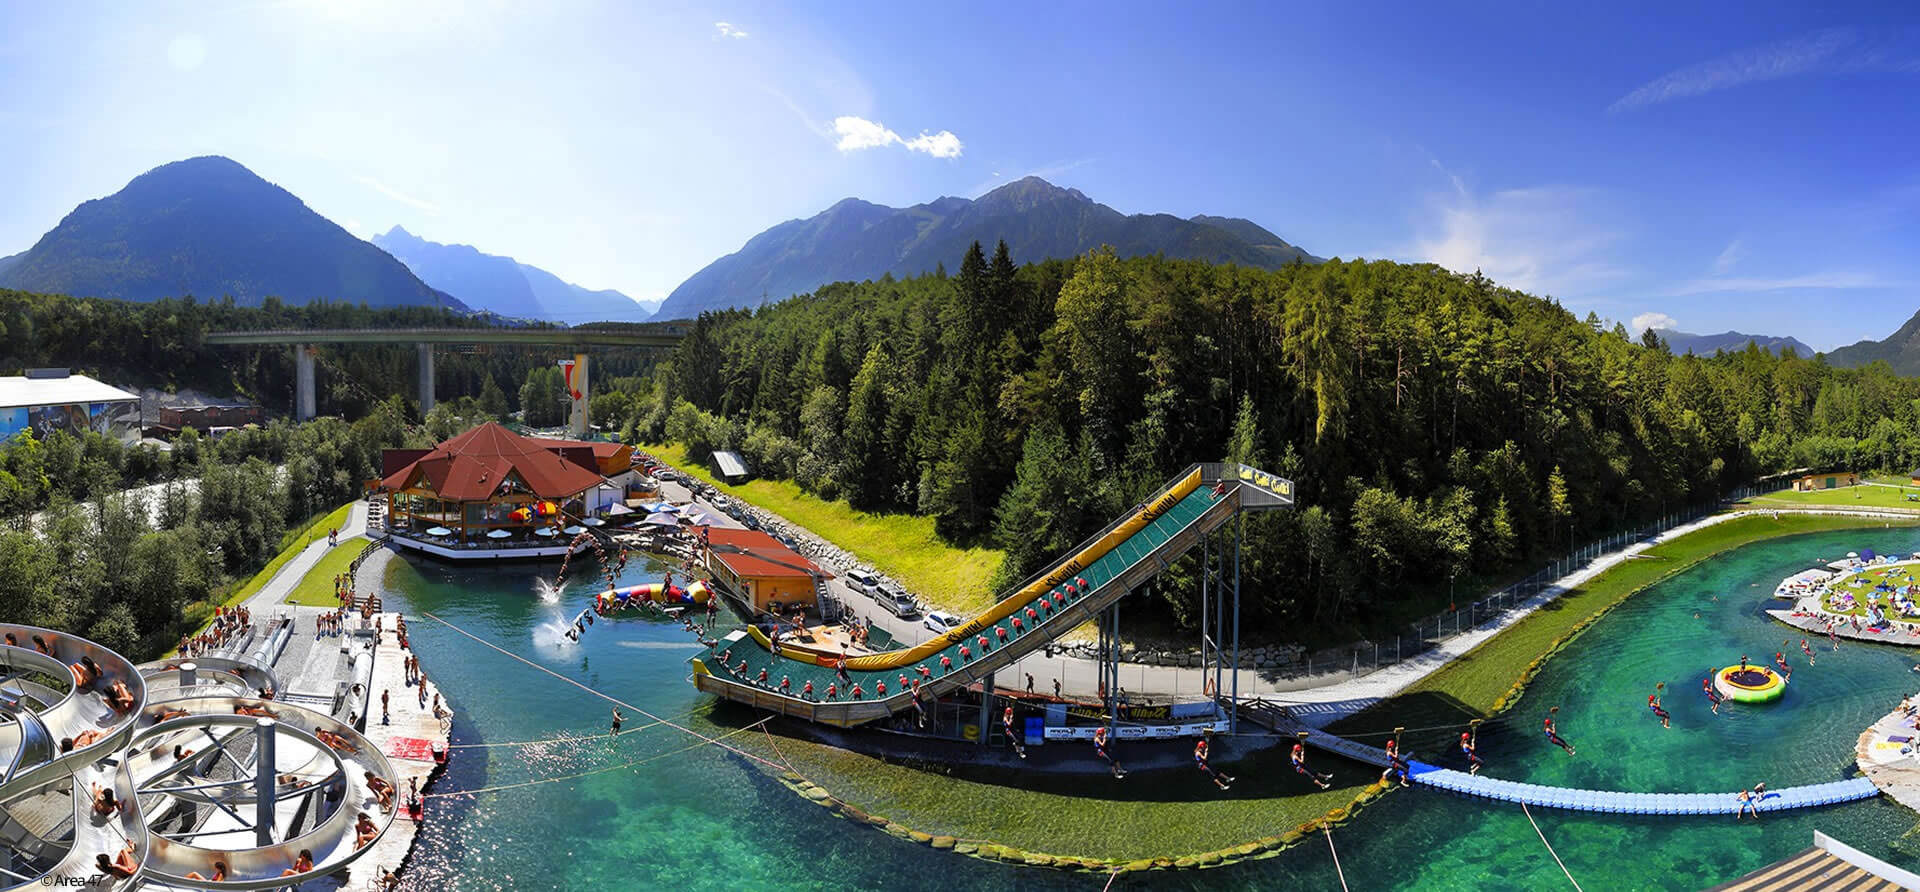 The Adventure Park in Upper Tyrol owes its name to the 47th line of latitude. Here children and adults can find action without end.